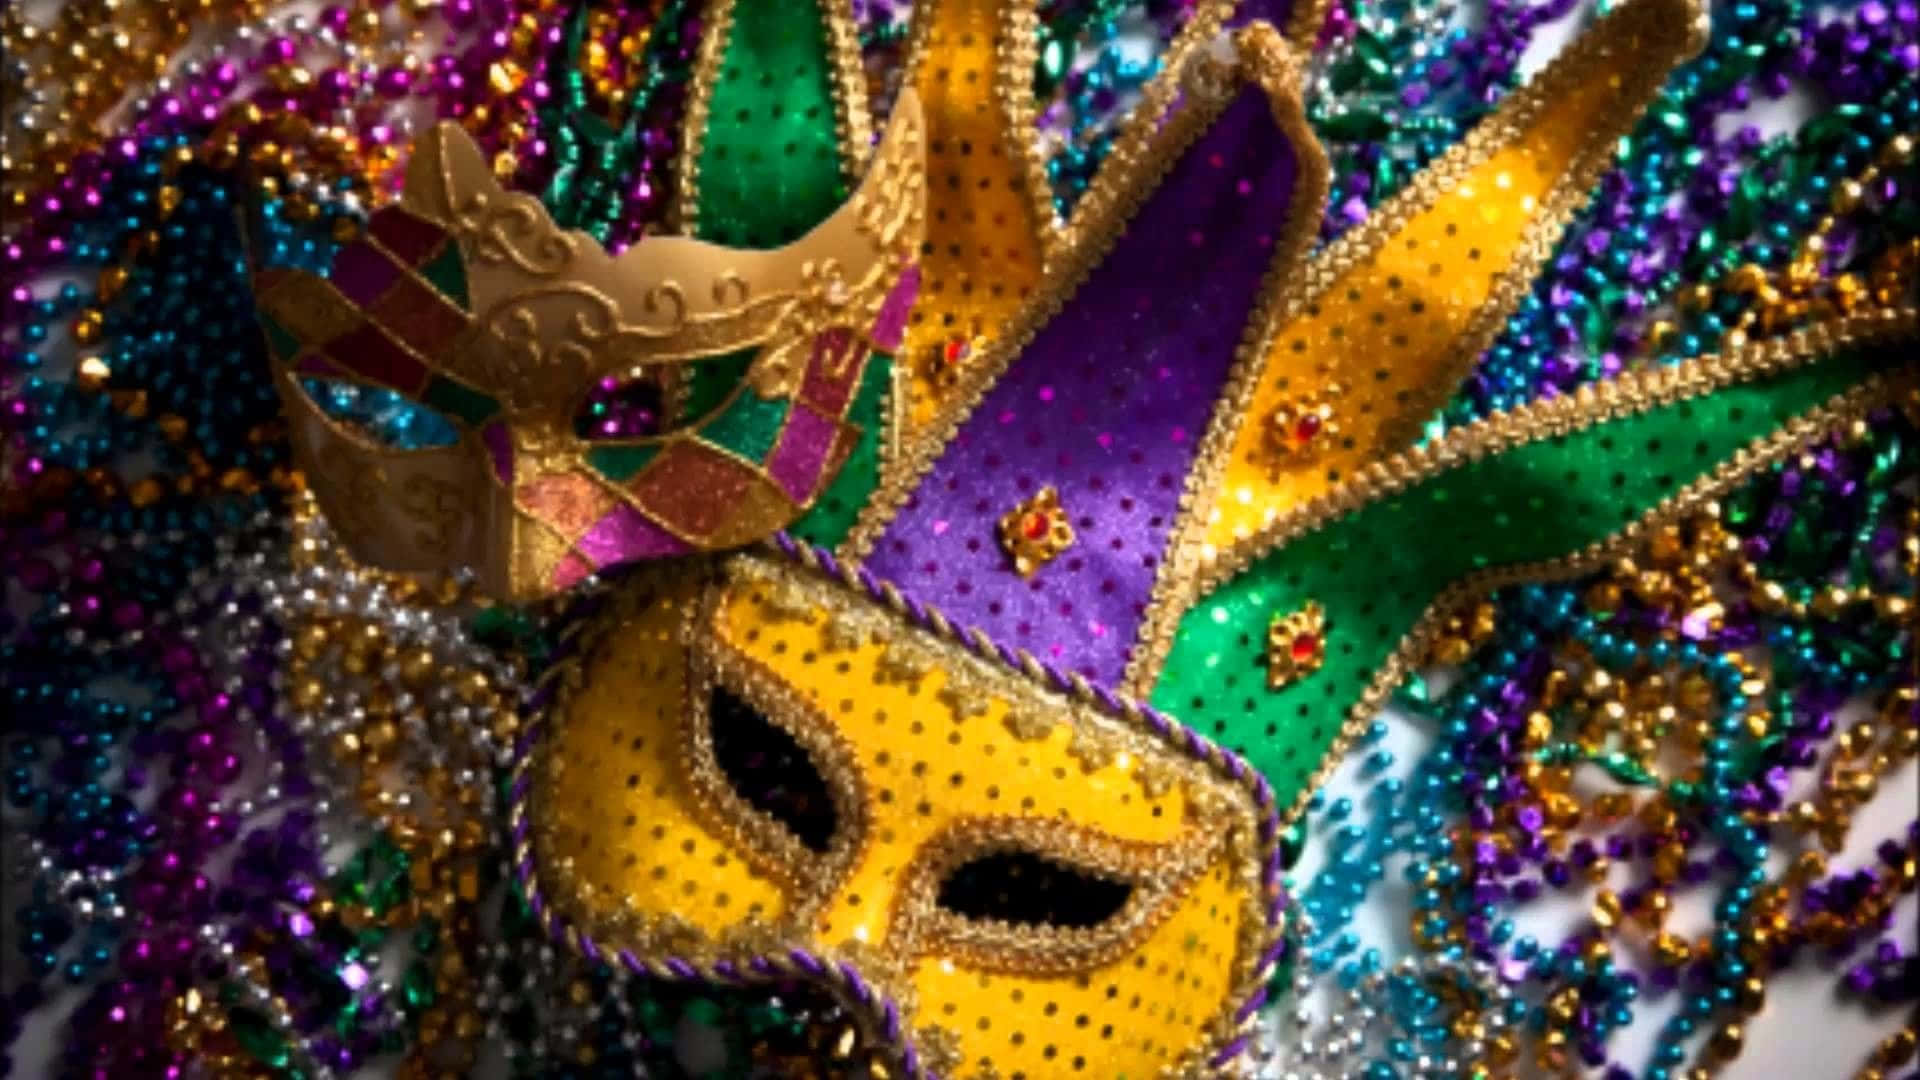 Mardi Gras Masks And Beads On A Table